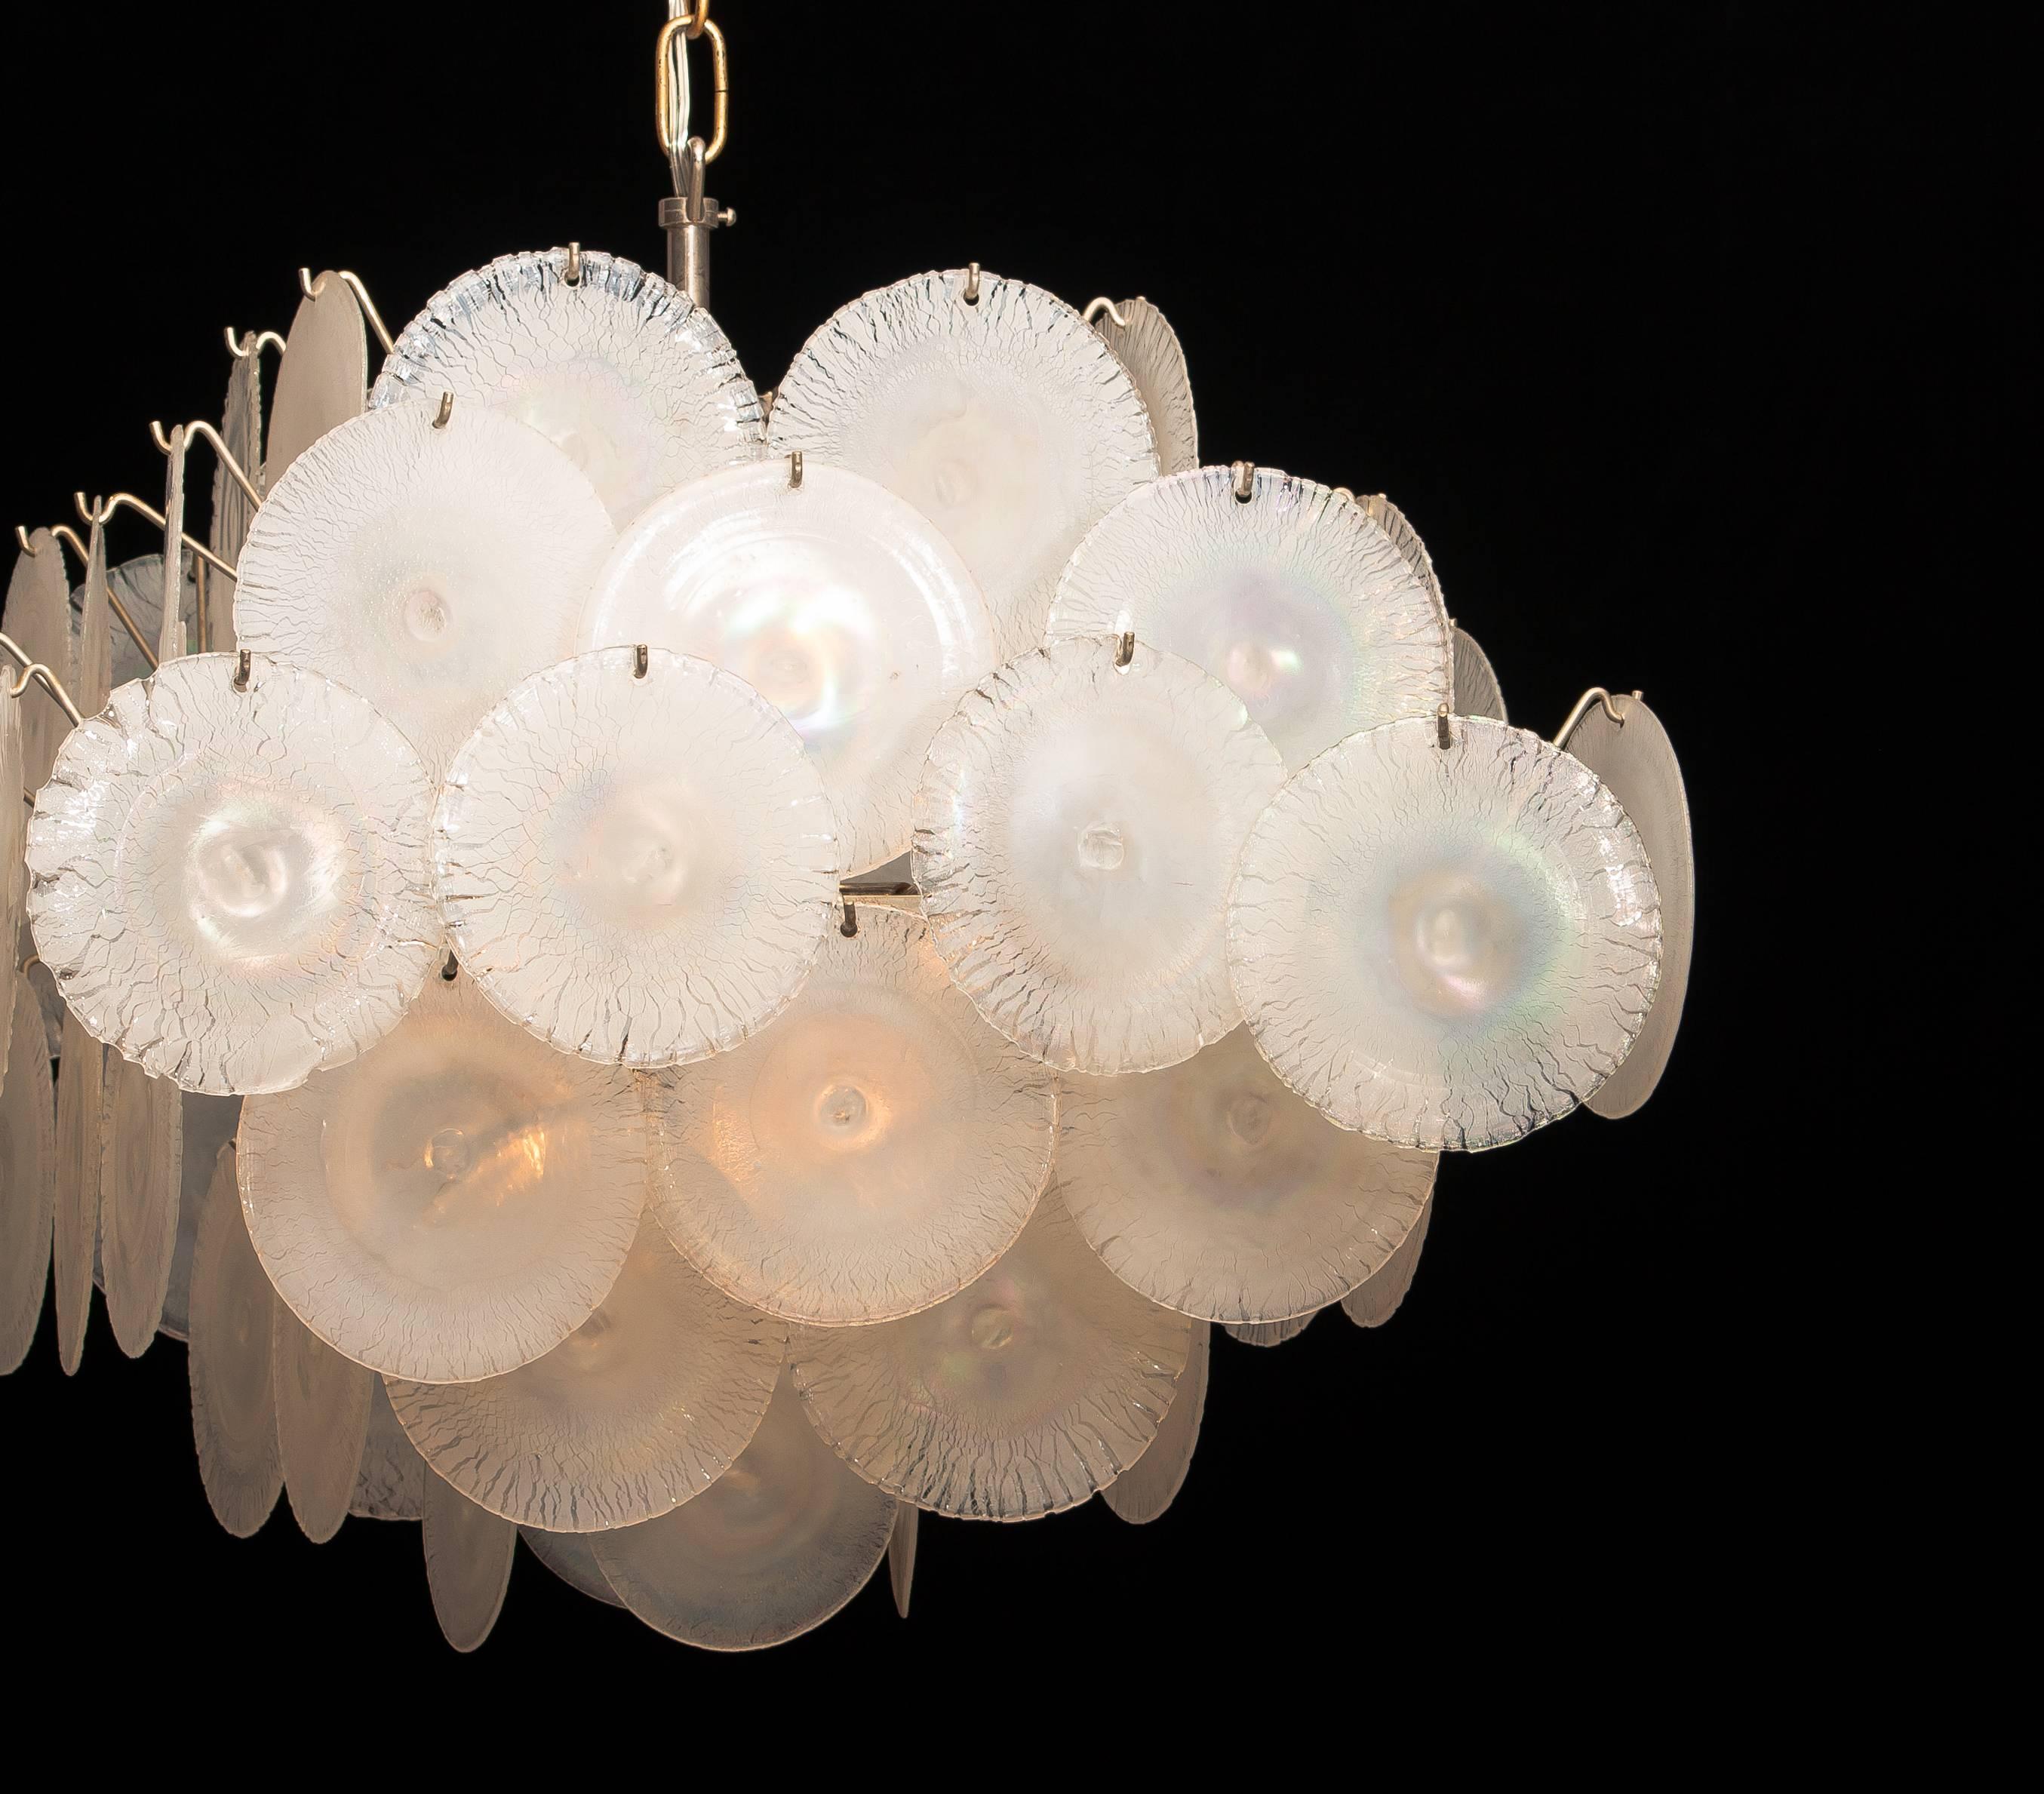 Gino Vistosi Chandelier with White / Pearl Murano Crystal Discs 1